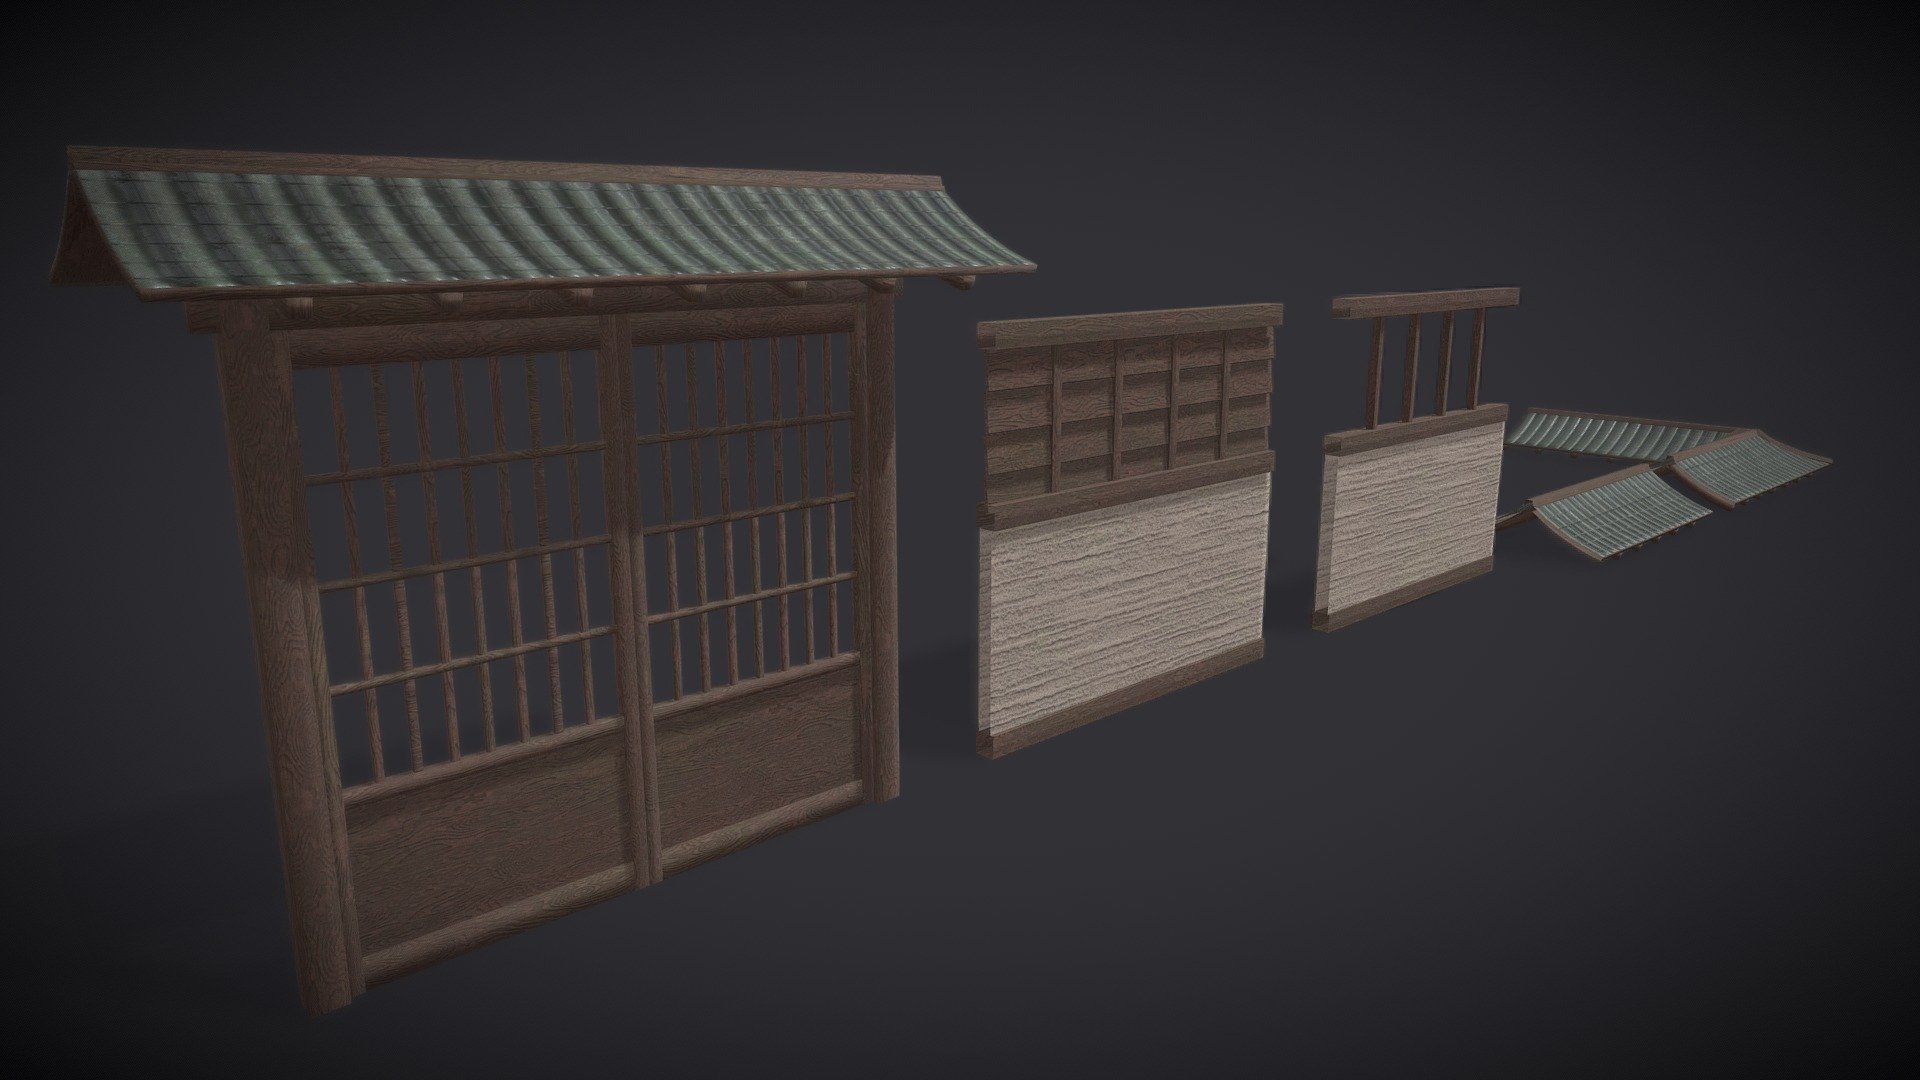 Traditional japanese - Asset Pack





Modular gate 

2 Variation with roof

VR Ready 

..................................

OVA’s flagship software, StellarX, allows those with no programming or coding knowledge to place 3D goods and create immersive experiences through simple drag-and-drop actions. 

Storytelling, which involves a series of interactions, sequences, and triggers are easily created through OVA’s patent-pending visual scripting tool. 

..................................

**Download StellarX on the Meta Quest Store: oculus.com/experiences/quest/8132958546745663
**

**Download StellarX on Steam: store.steampowered.com/app/1214640/StellarX
**

Have a bigger immersive project in mind? Get in touch with us! 



StellarX on LinkedIn: linkedin.com/showcase/stellarx-by-ova

Join the StellarX Discord server! 

..................................

StellarX© 2024 - Traditional Japanese House | Gate - Buy Royalty Free 3D model by StellarX 3d model